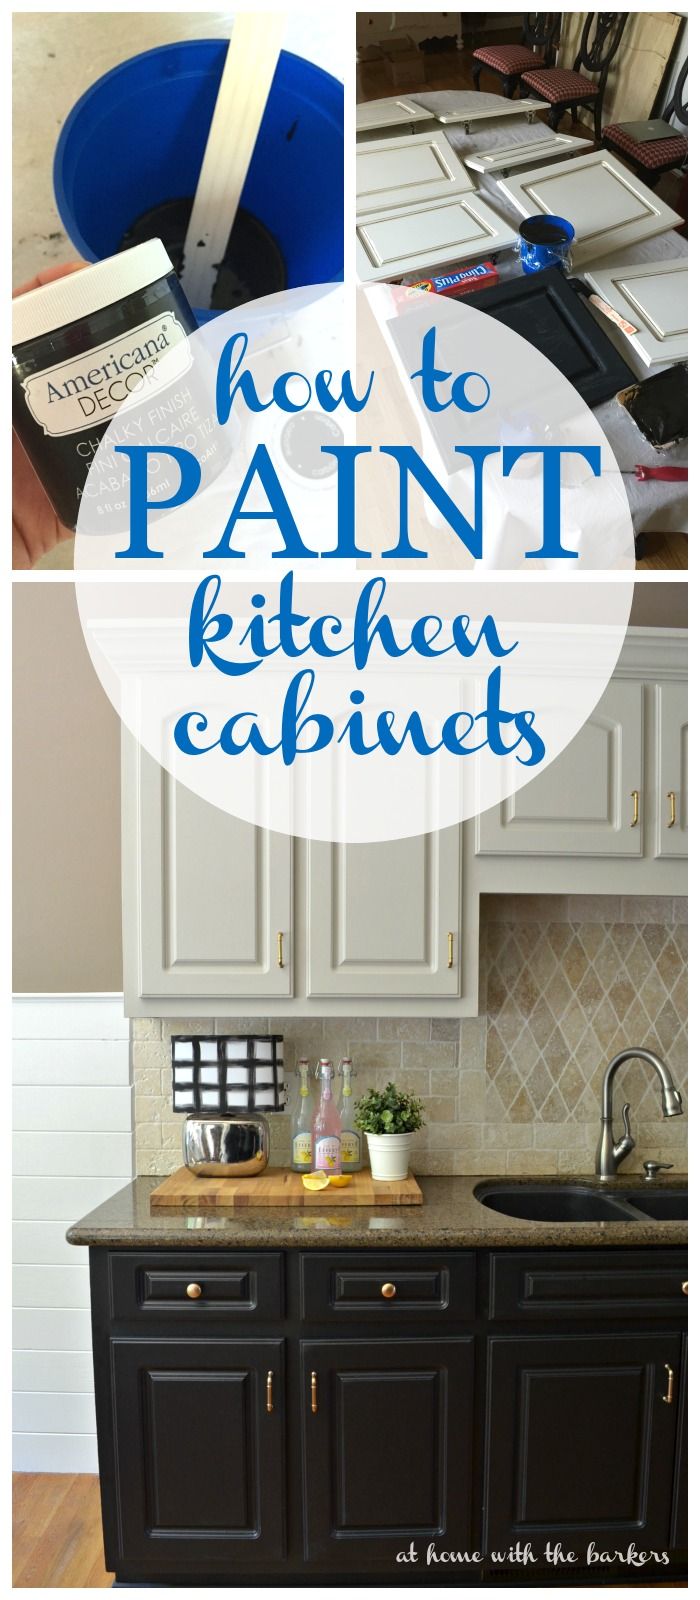 How to Paint Kitchen Cabinets with Chalky Finish Paint #athomewiththebarkers #DI...